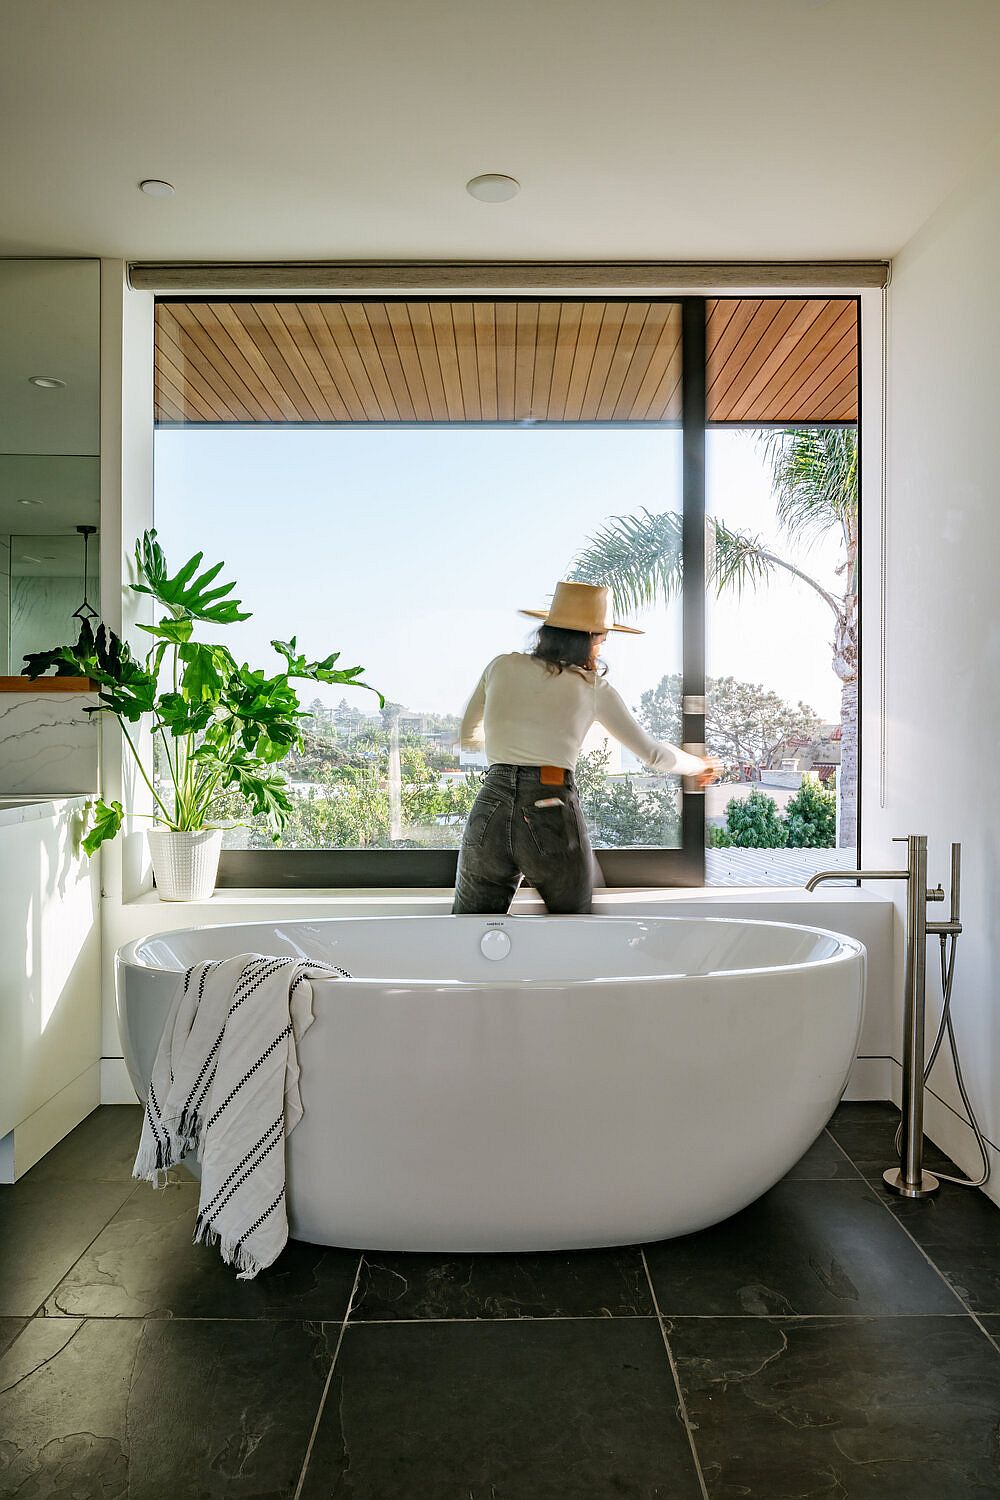 Large freeestanding bathtub in white is the focal point of the spacious modern bathroom